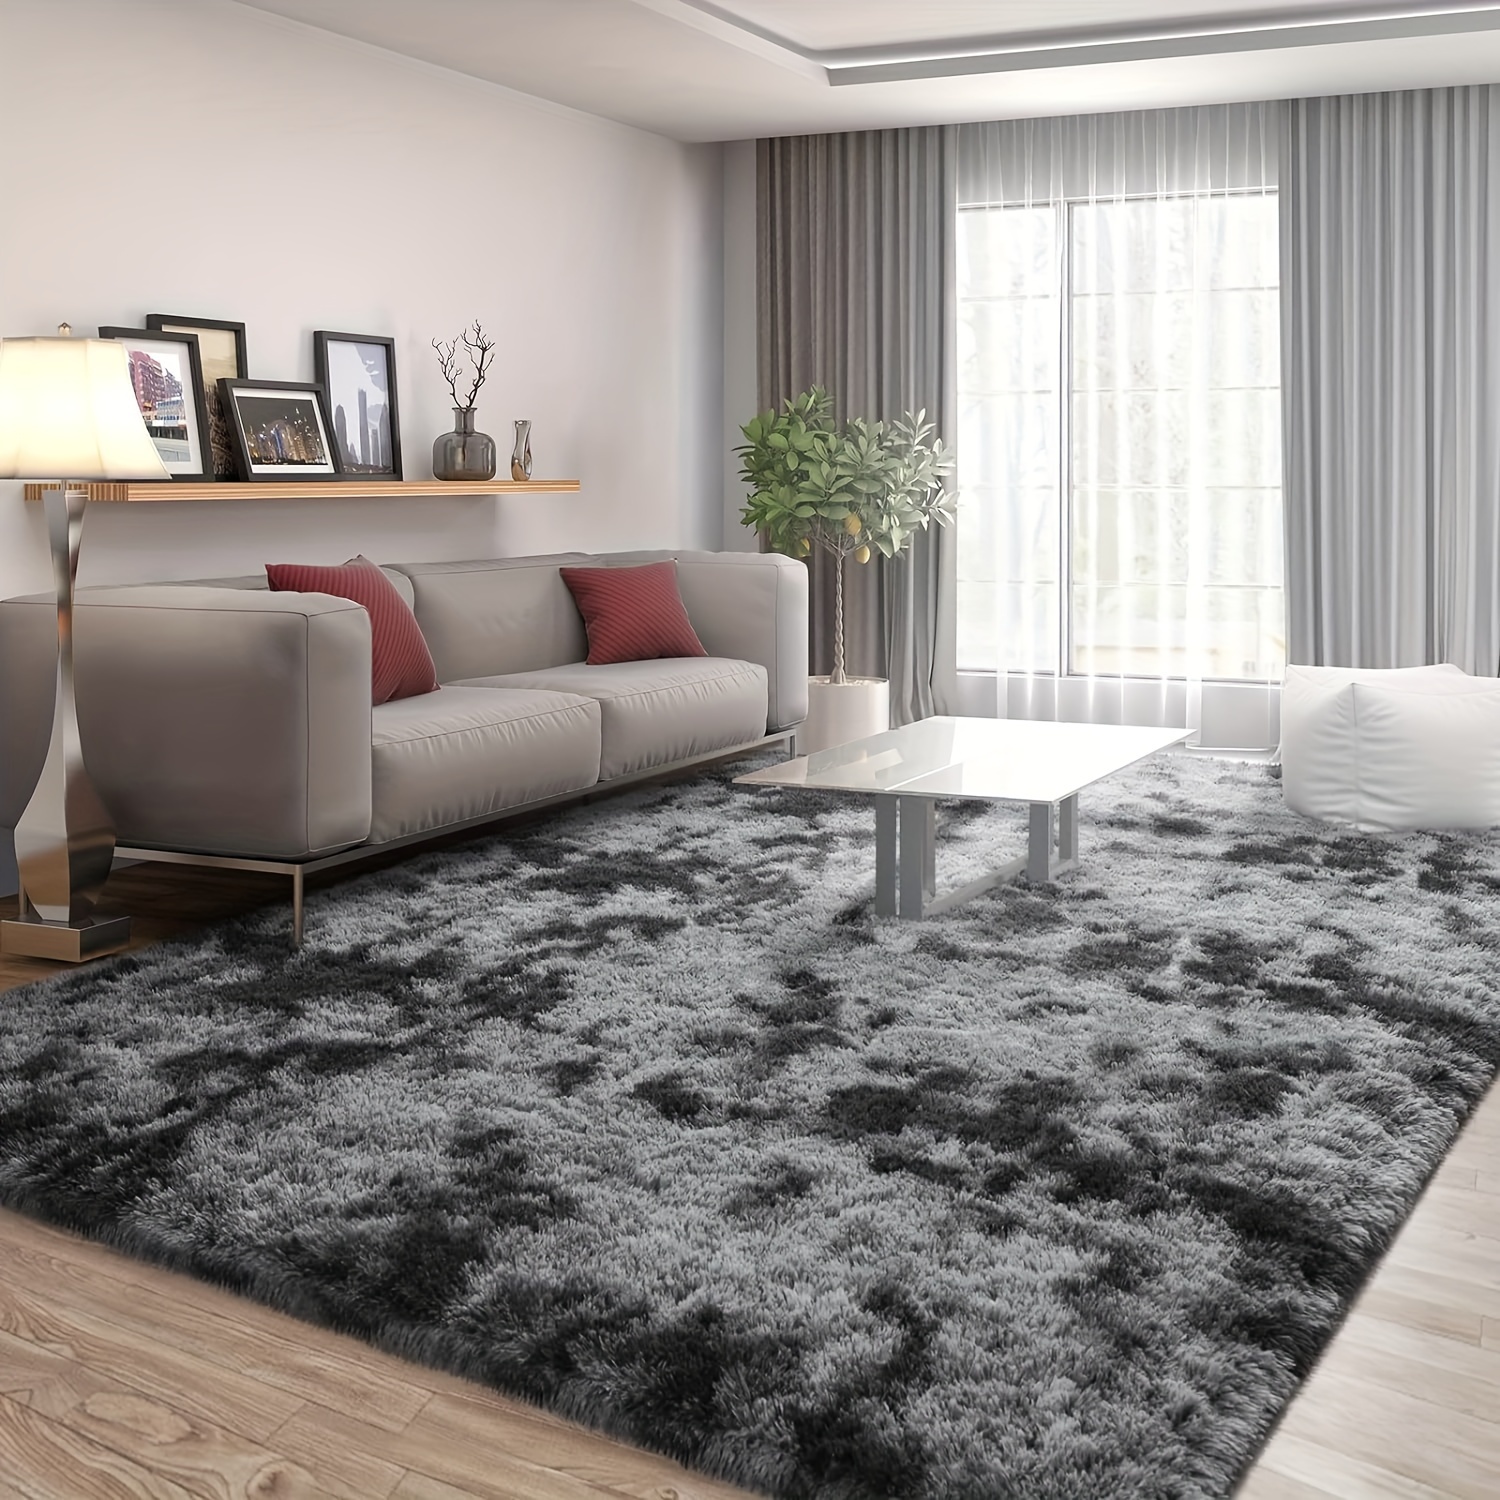 

1pcs Tie-dyed Light Grey High Pile Anti-skid Rectangular Rug - Ultra Soft, Skin-friendly, Easy To Clean, Machine Washable, Durable Throw Rug For Nursery, Living Room, Bedroom, And Multi-scene Use